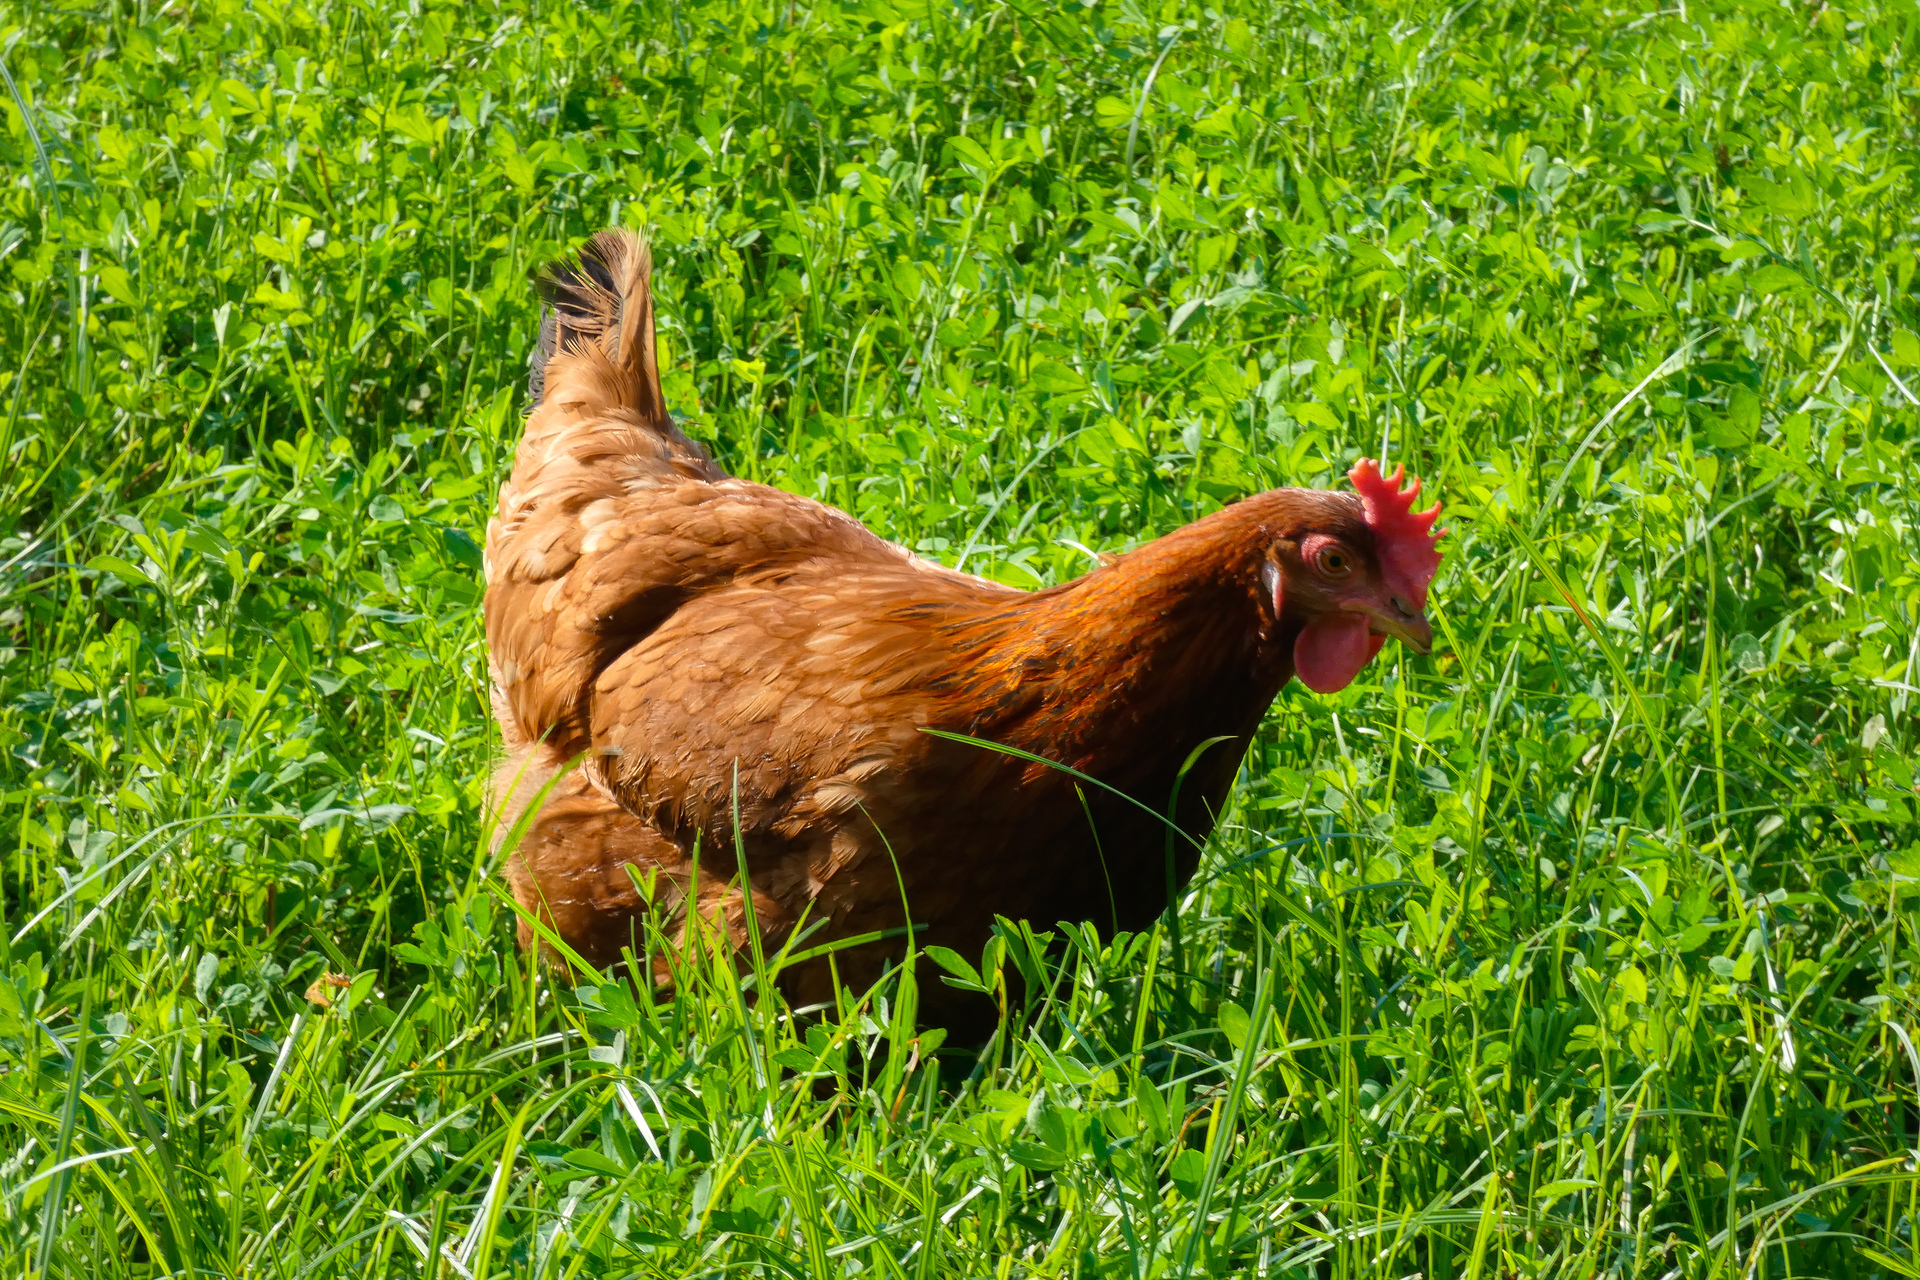 A domestic hen with light-brown feathers is captured in the midst of enjoying a crunchy celery stalk, pecking at the fibrous vegetable with keen interest in a rustic farm setting